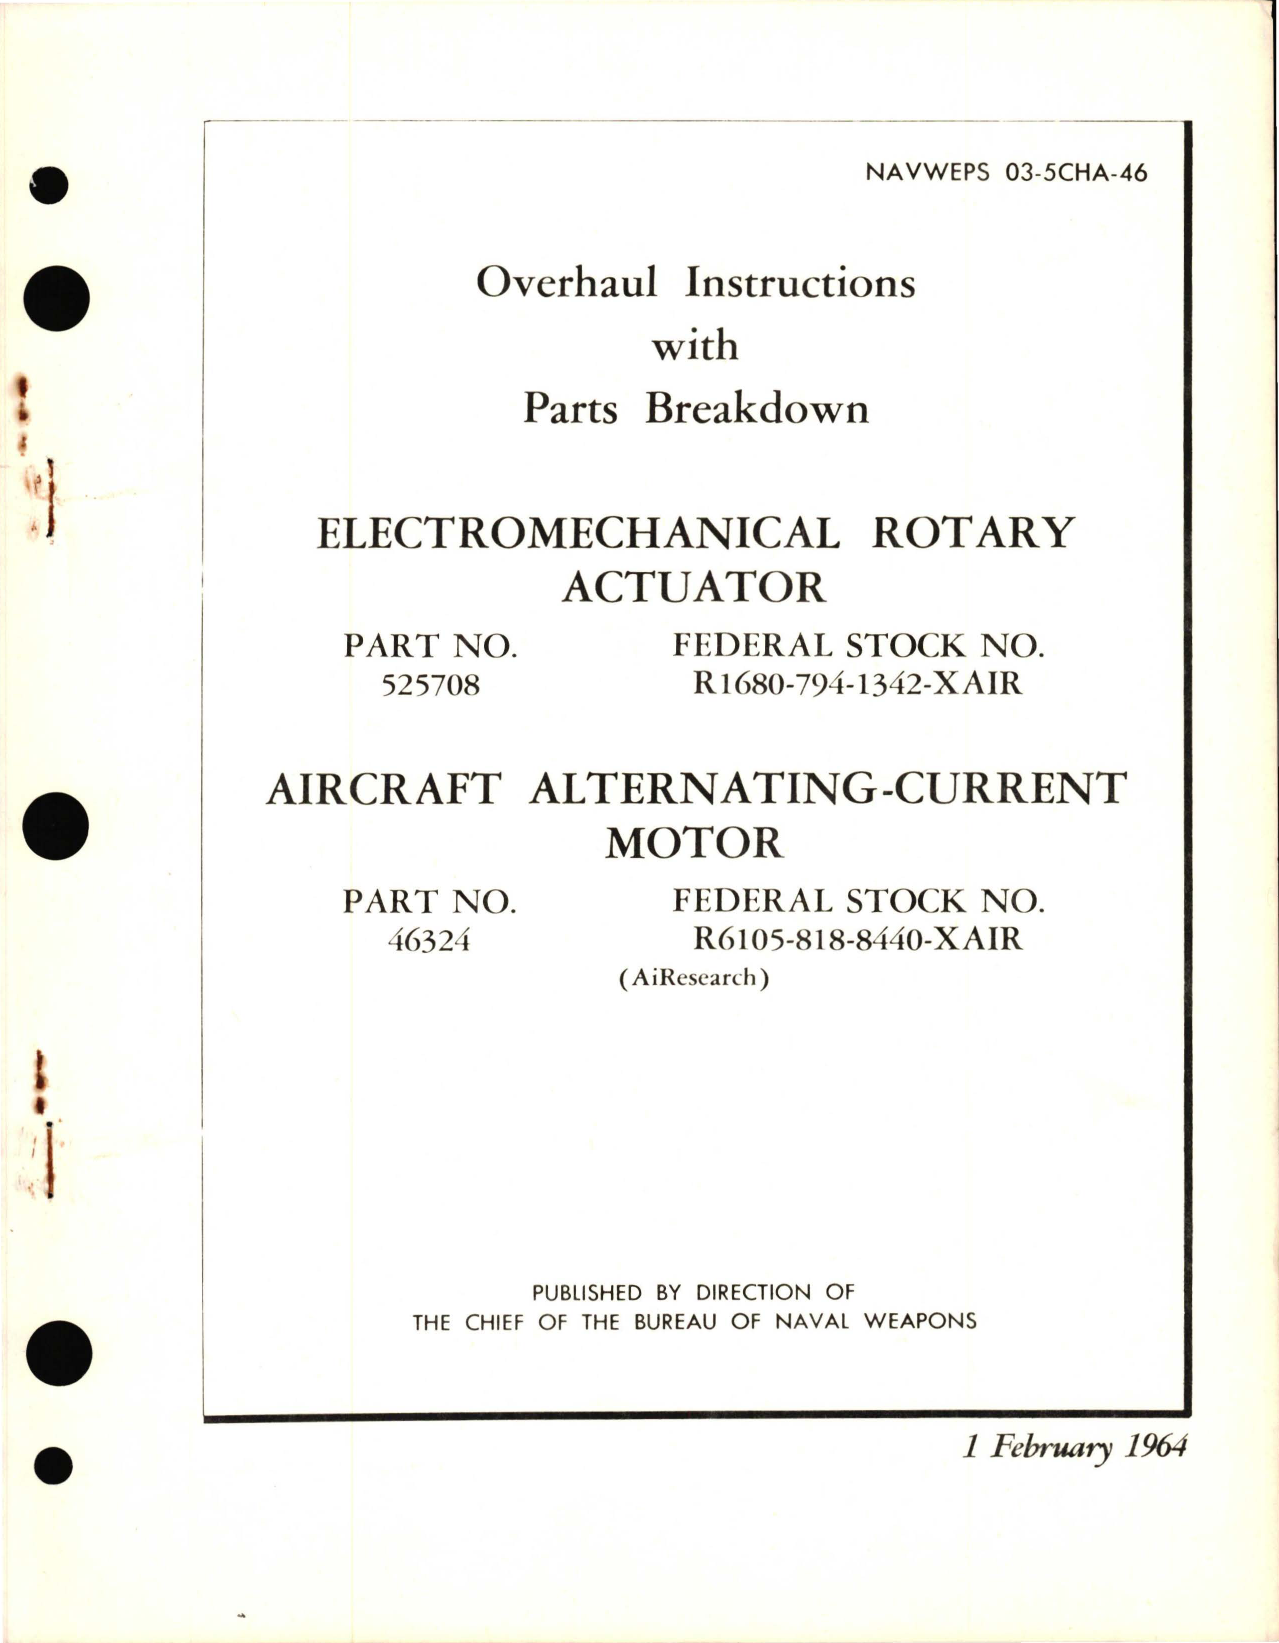 Sample page 1 from AirCorps Library document: Overhaul Instructions with Parts Breakdown for Electromechanical Rotary Actuator and Aircraft Alternating Current Motor